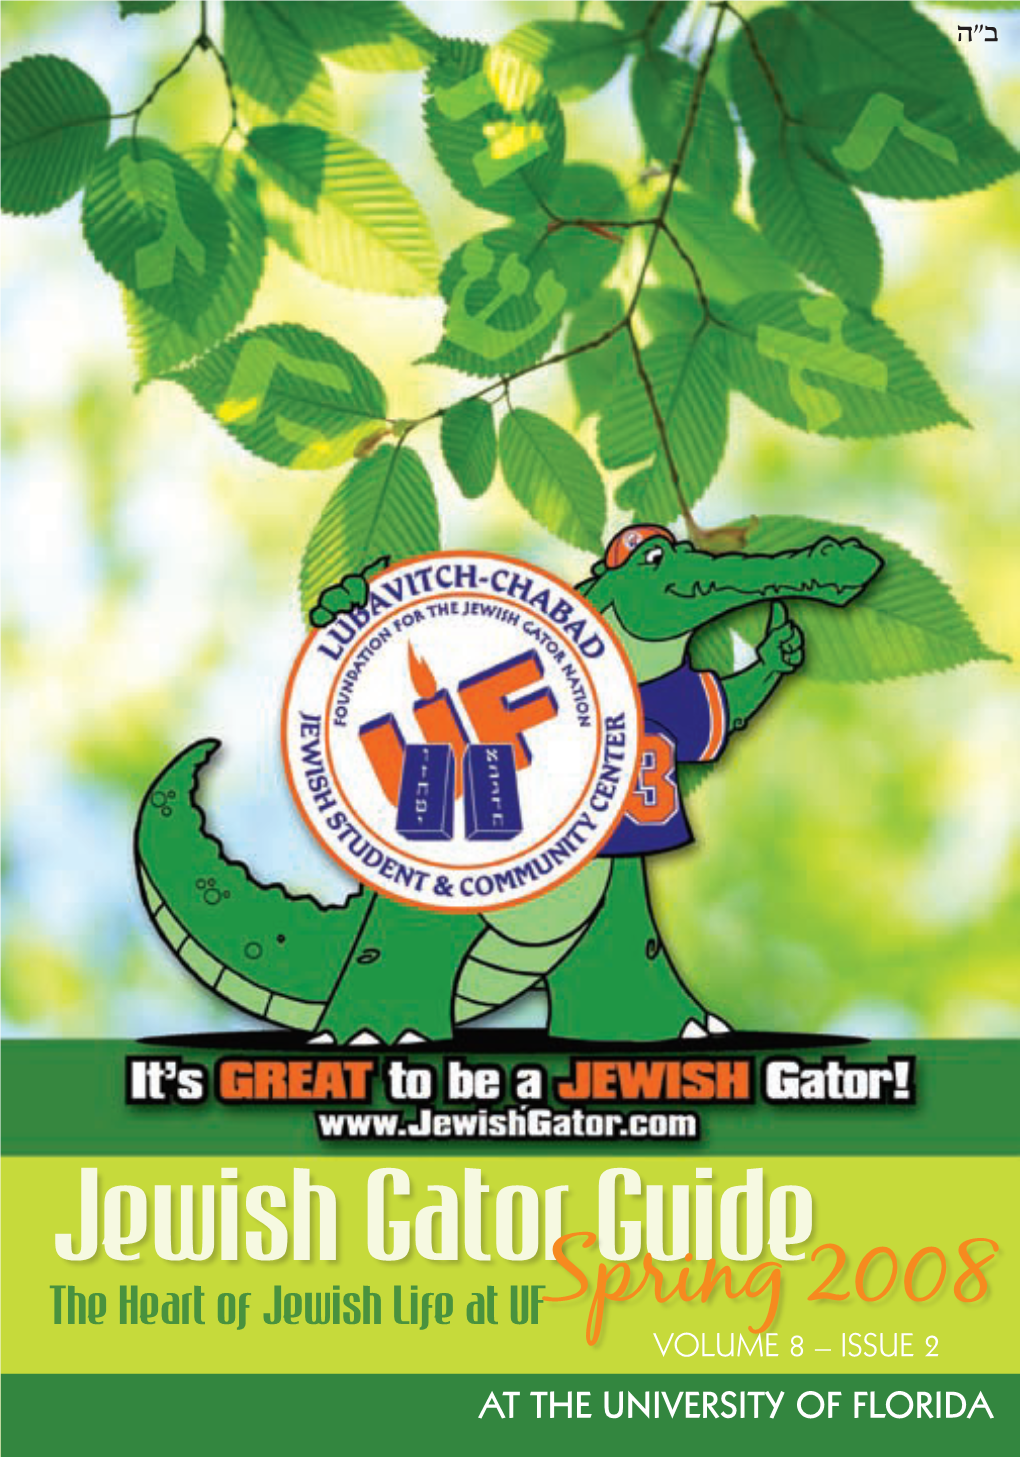 Jewish Gator Guide the Heart of Jewish Life at UF Springvolume 8 2008 – ISSUE 2 at the UNIVERSITY of FLORIDA Dear Friends, Shalom!